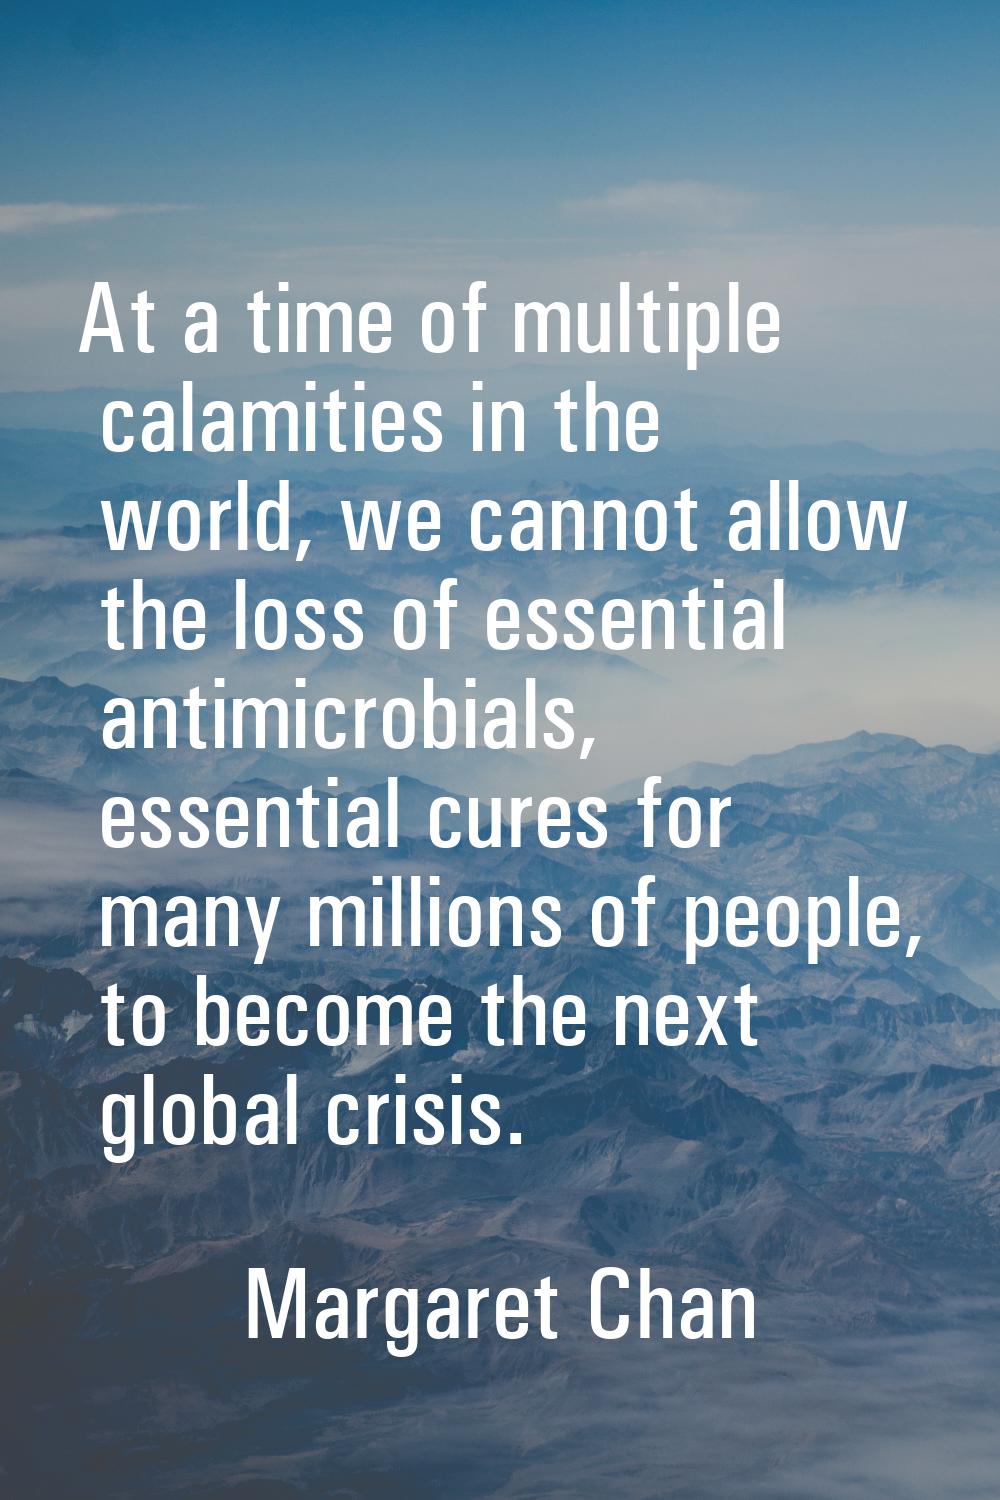 At a time of multiple calamities in the world, we cannot allow the loss of essential antimicrobials